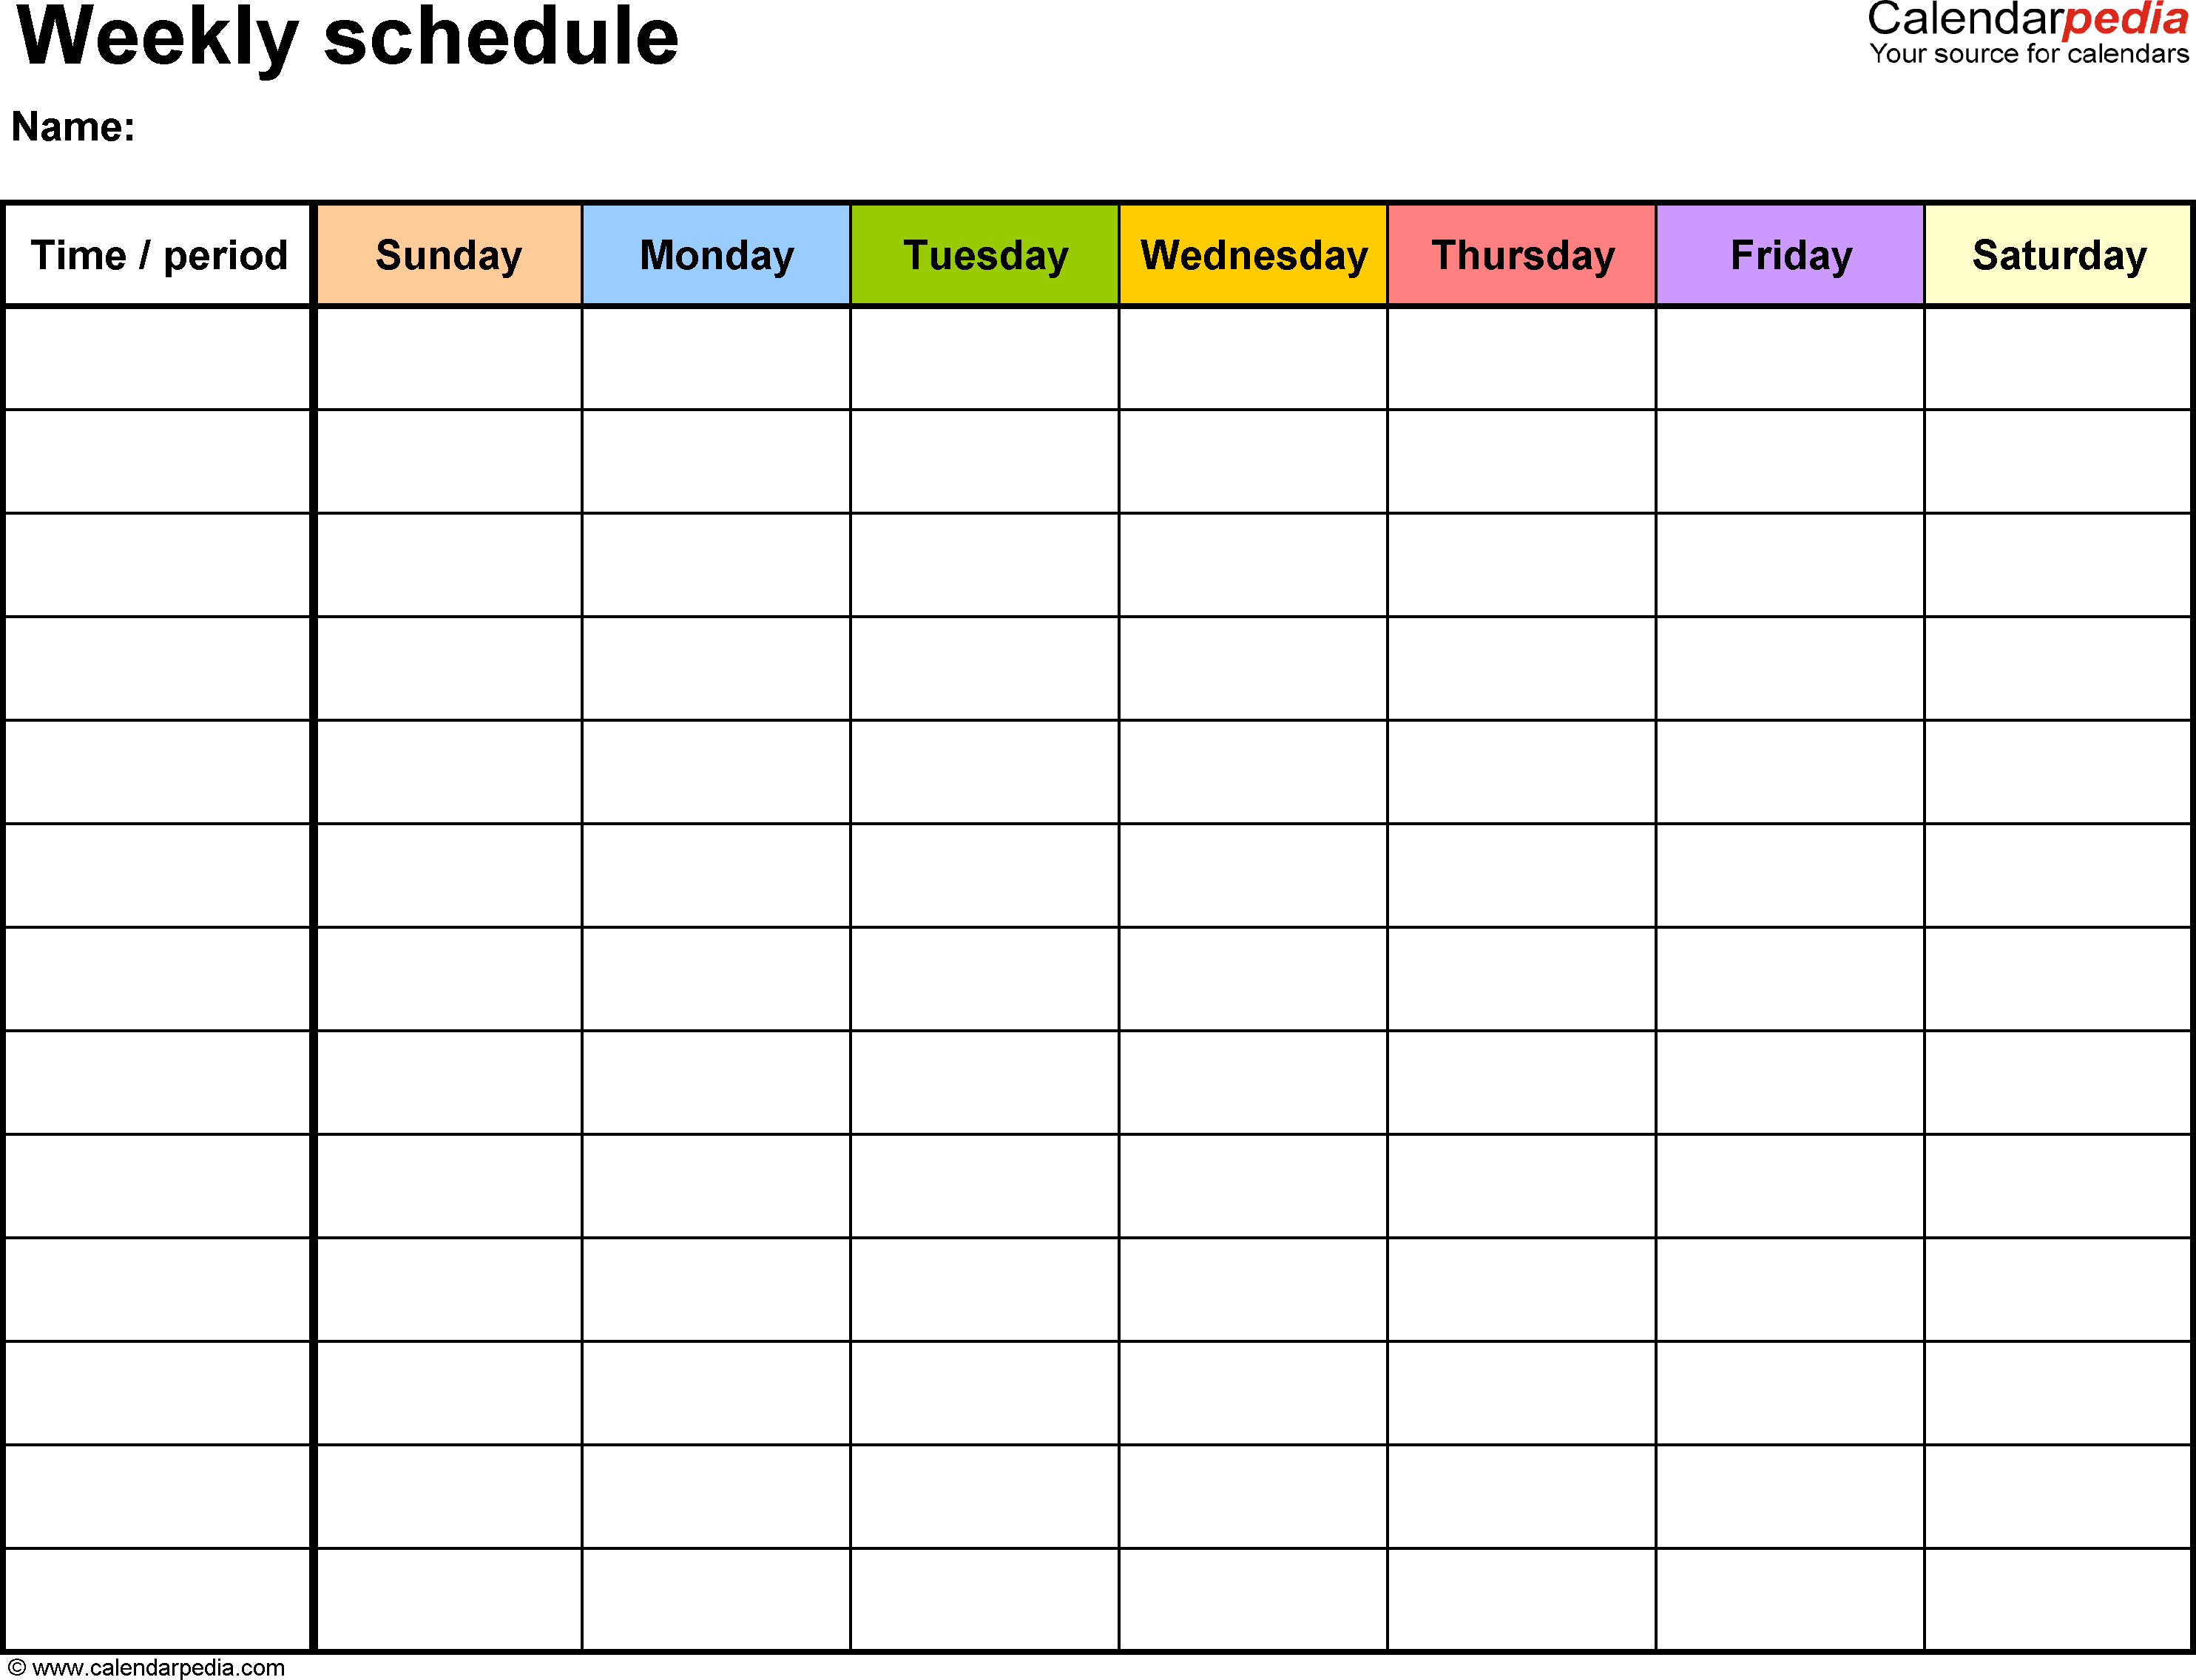 Free Weekly Schedule Templates For Word - 18 Templates - Free Printable Weekly Appointment Sheets